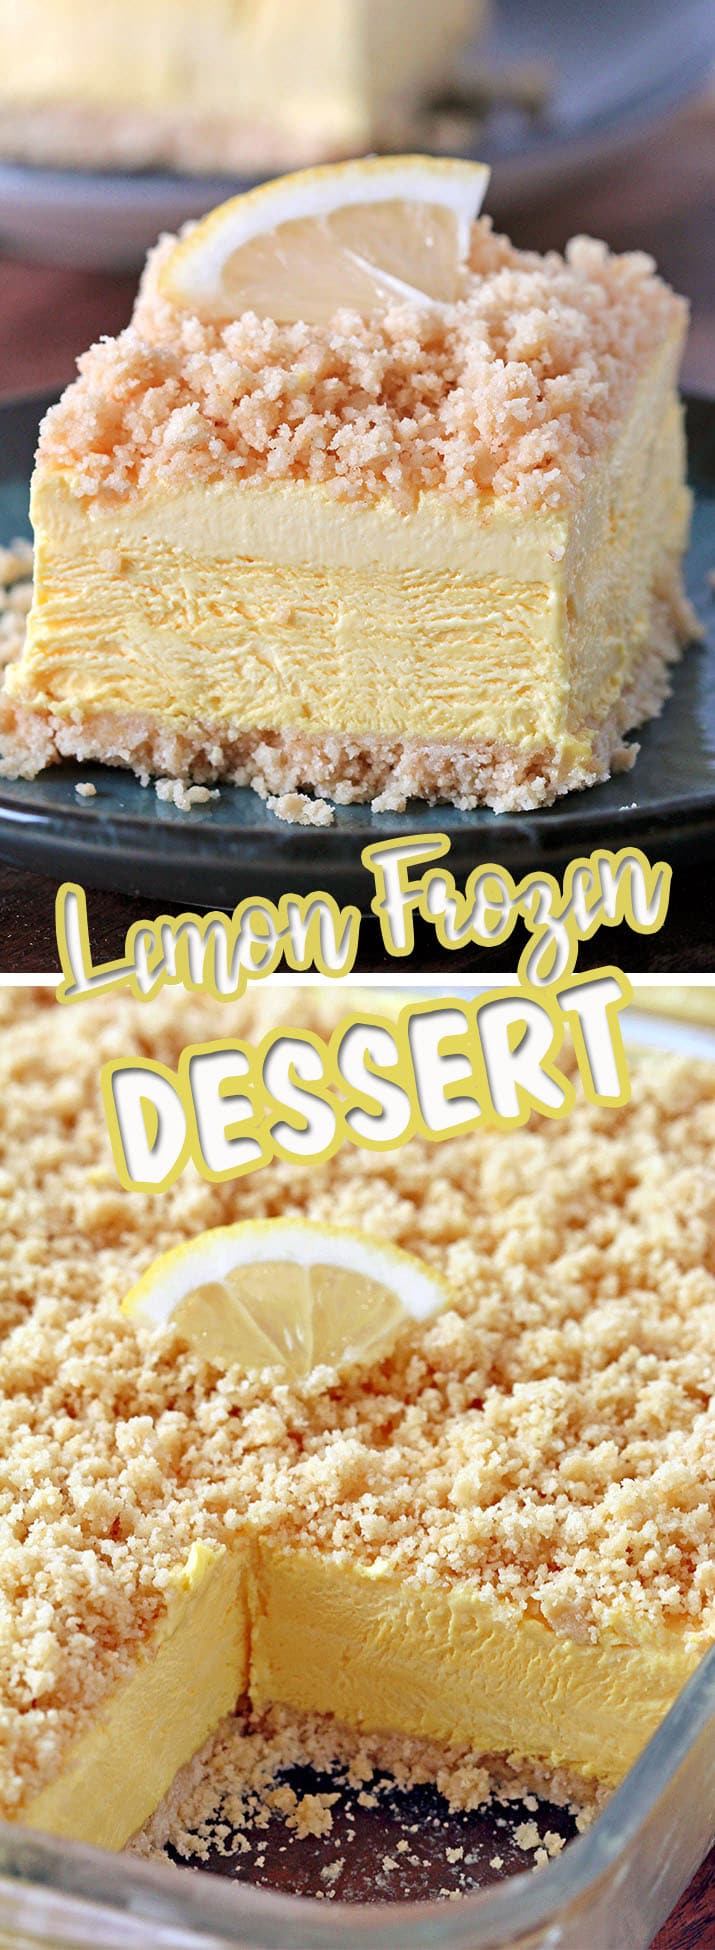 Easy Frozen Lemon Dessert – this refreshing dessert with Golden Oreo cookies crust, frozen creamy lemon filling, topped with Golden Oreo crumbs is so quick and easy to prepare. It’s a very simple dessert with refreshing lemon flavor.